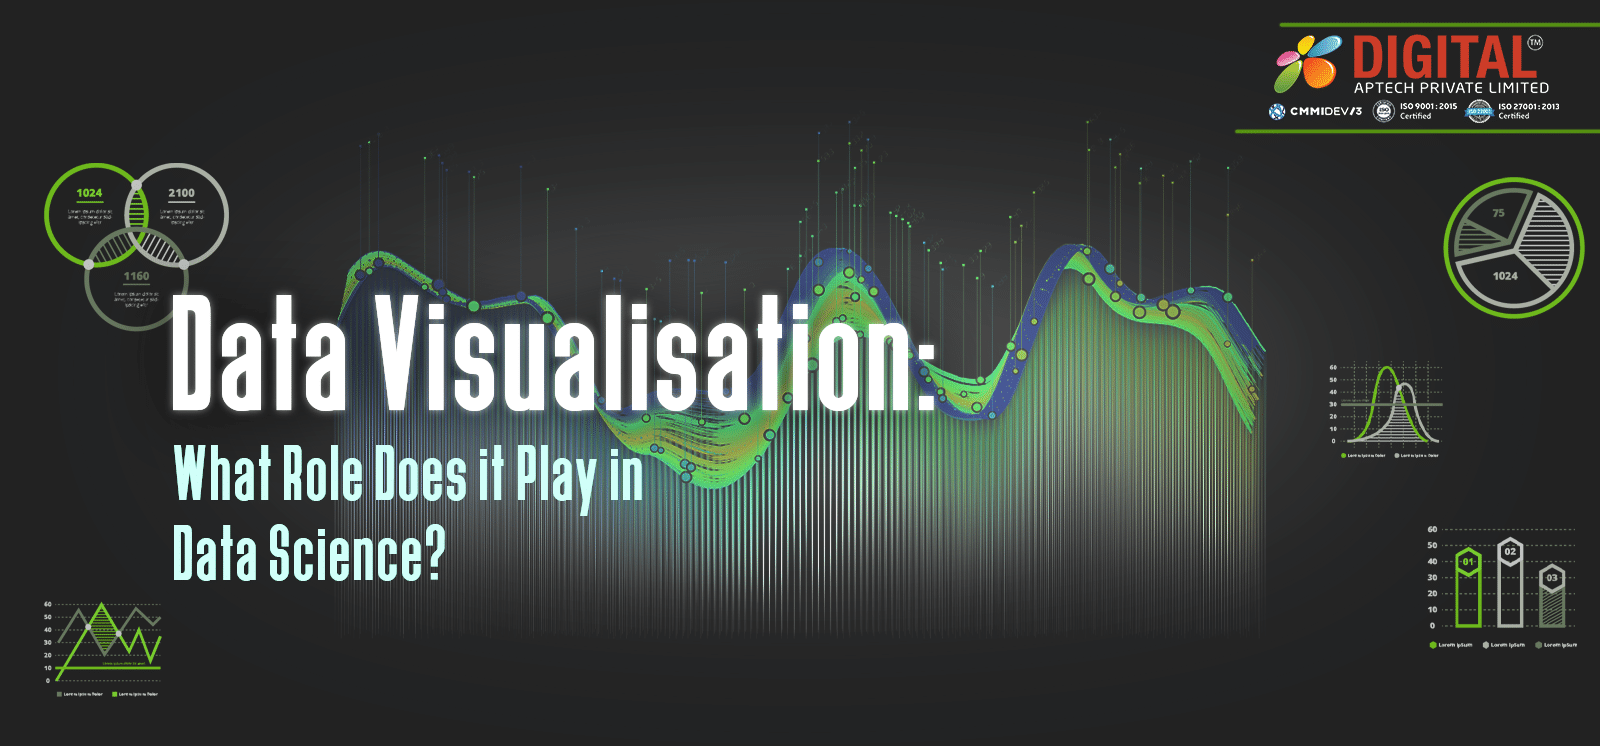 Data Visualisation: What Role Does it Play in Data Science?